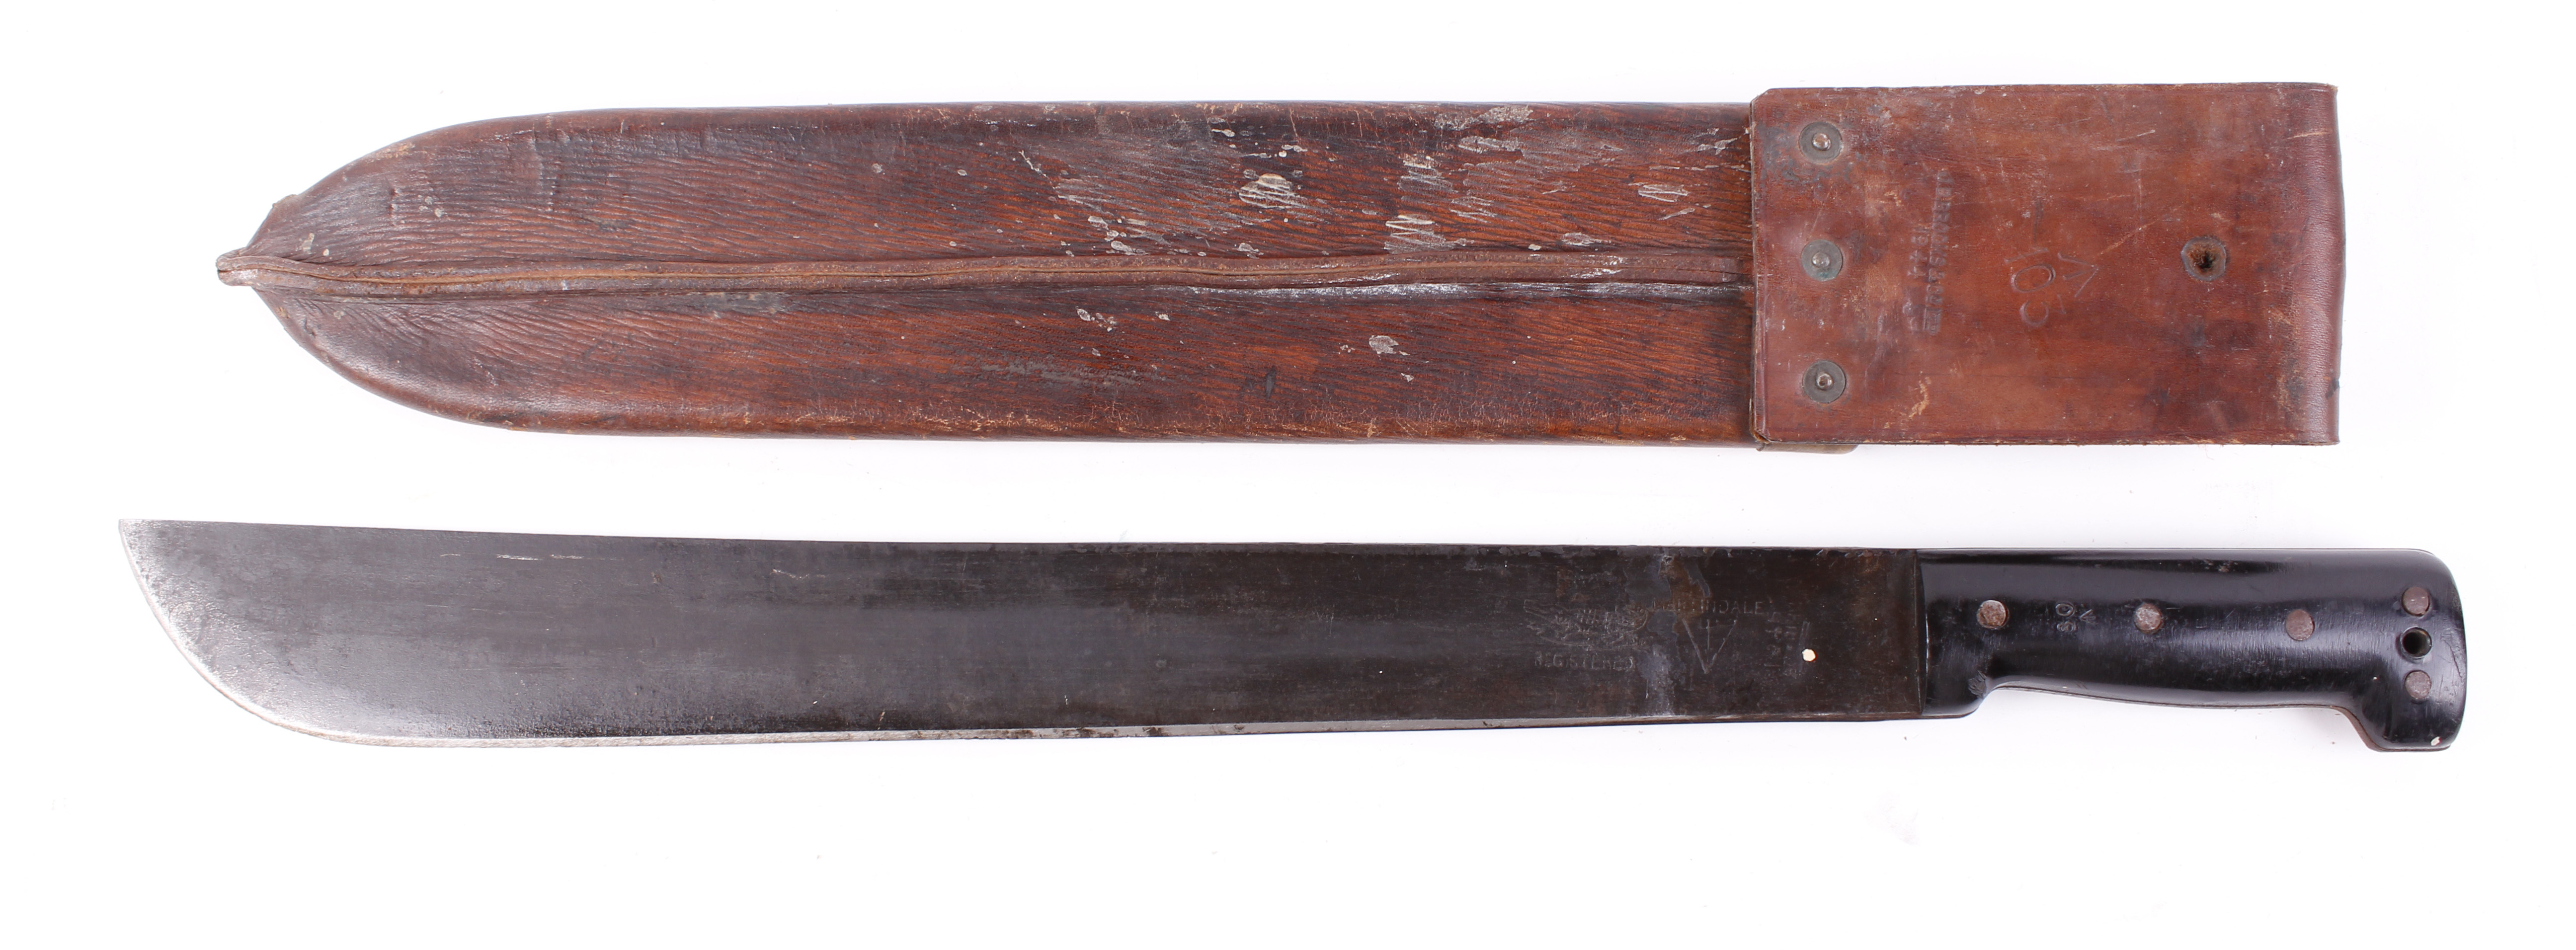 Martindale 17½ ins straight backed machete, marked with broad arrow dated 1945 in period J.B. Brooks - Image 2 of 2